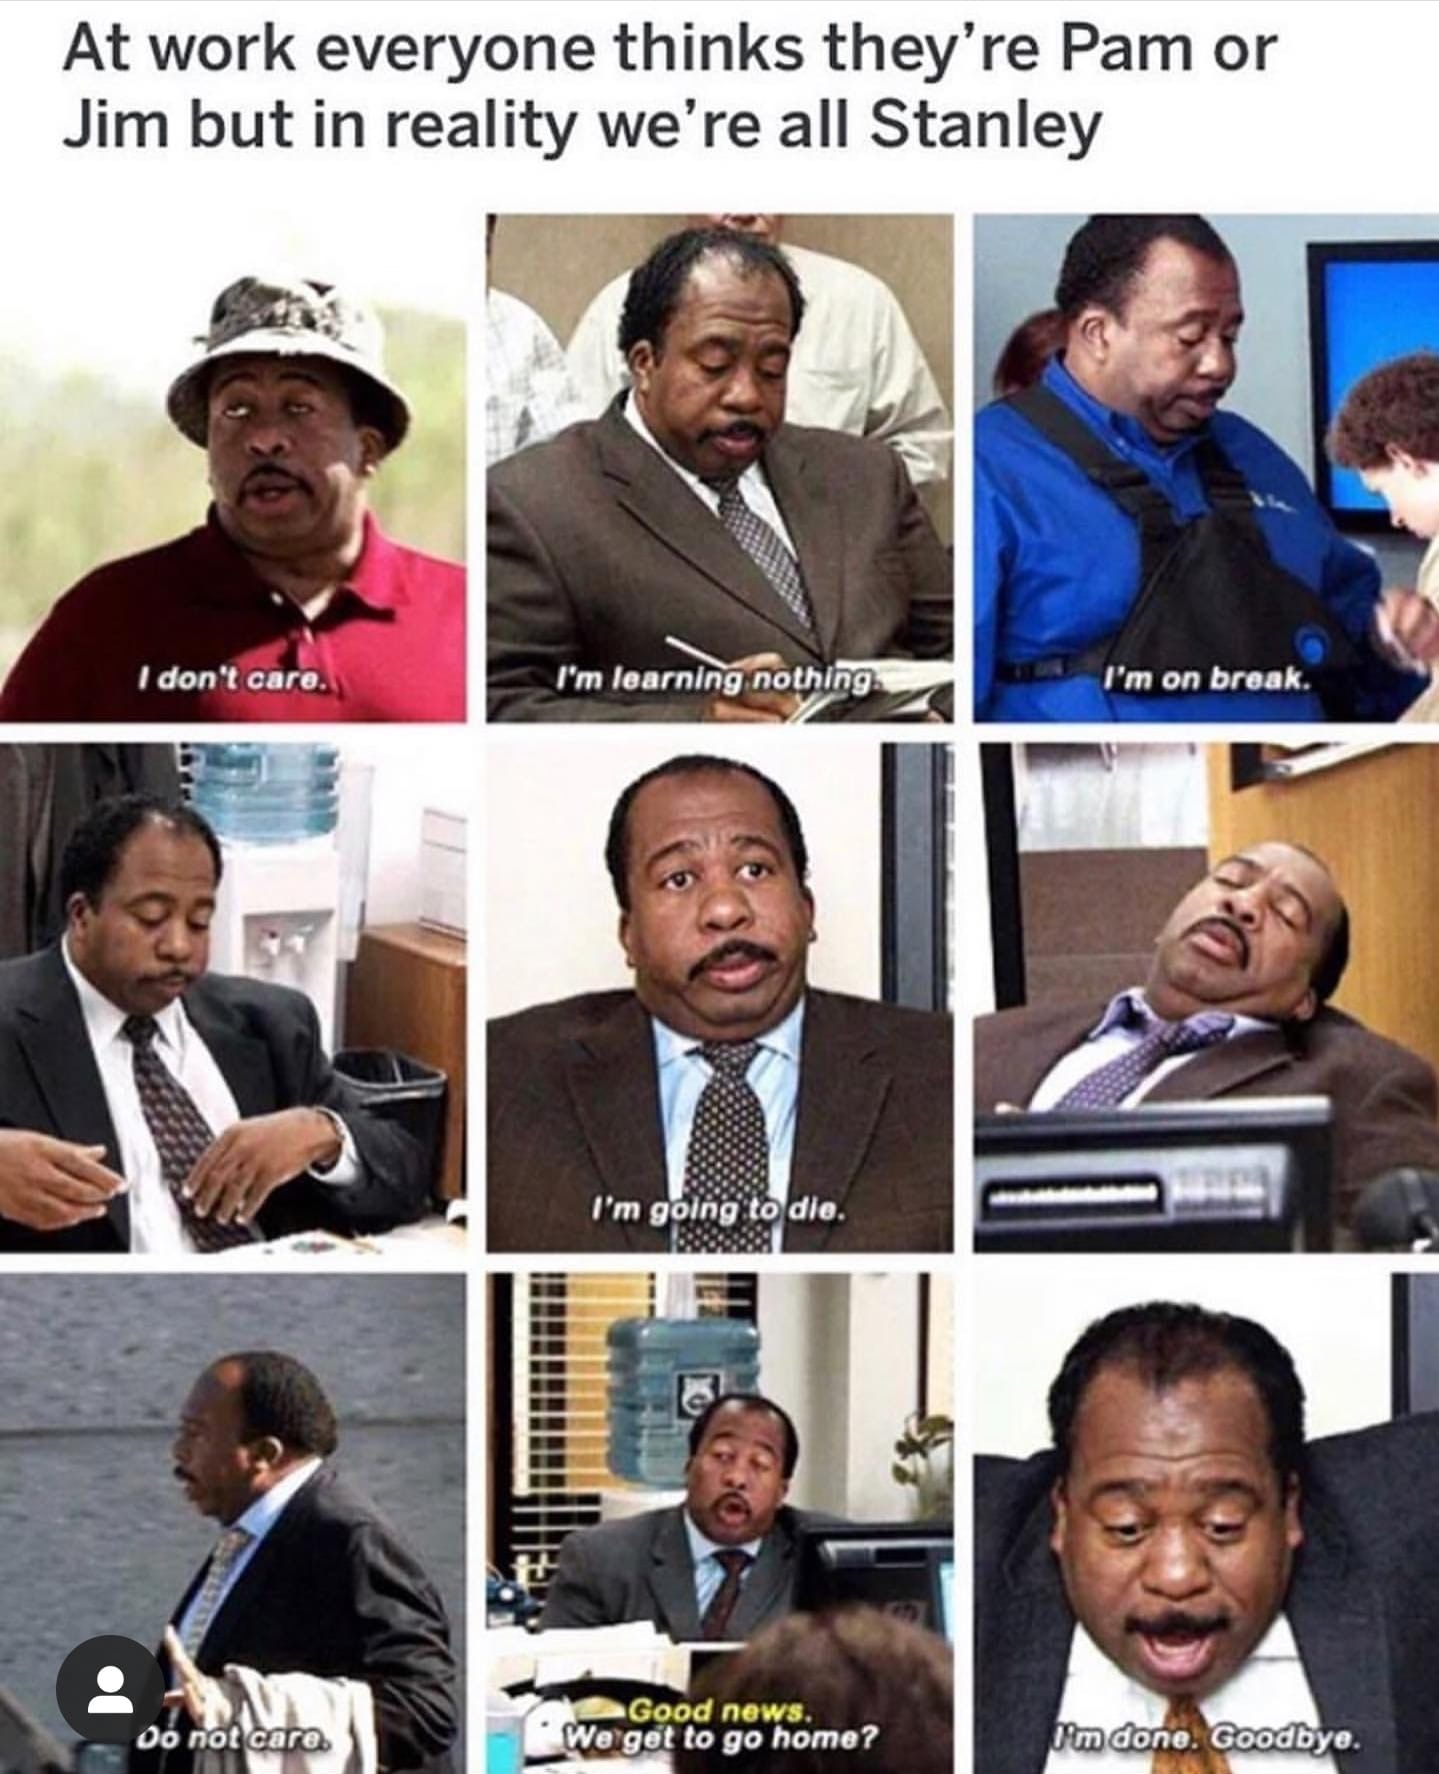 stanley are you today - At work everyone thinks they're Pam or Jim but in reality we're all Stanley I don't care. I'm learning nothing I'm on break. I'm going to die. Do not care Good news. We get to go home? I'm done. Goodbye.